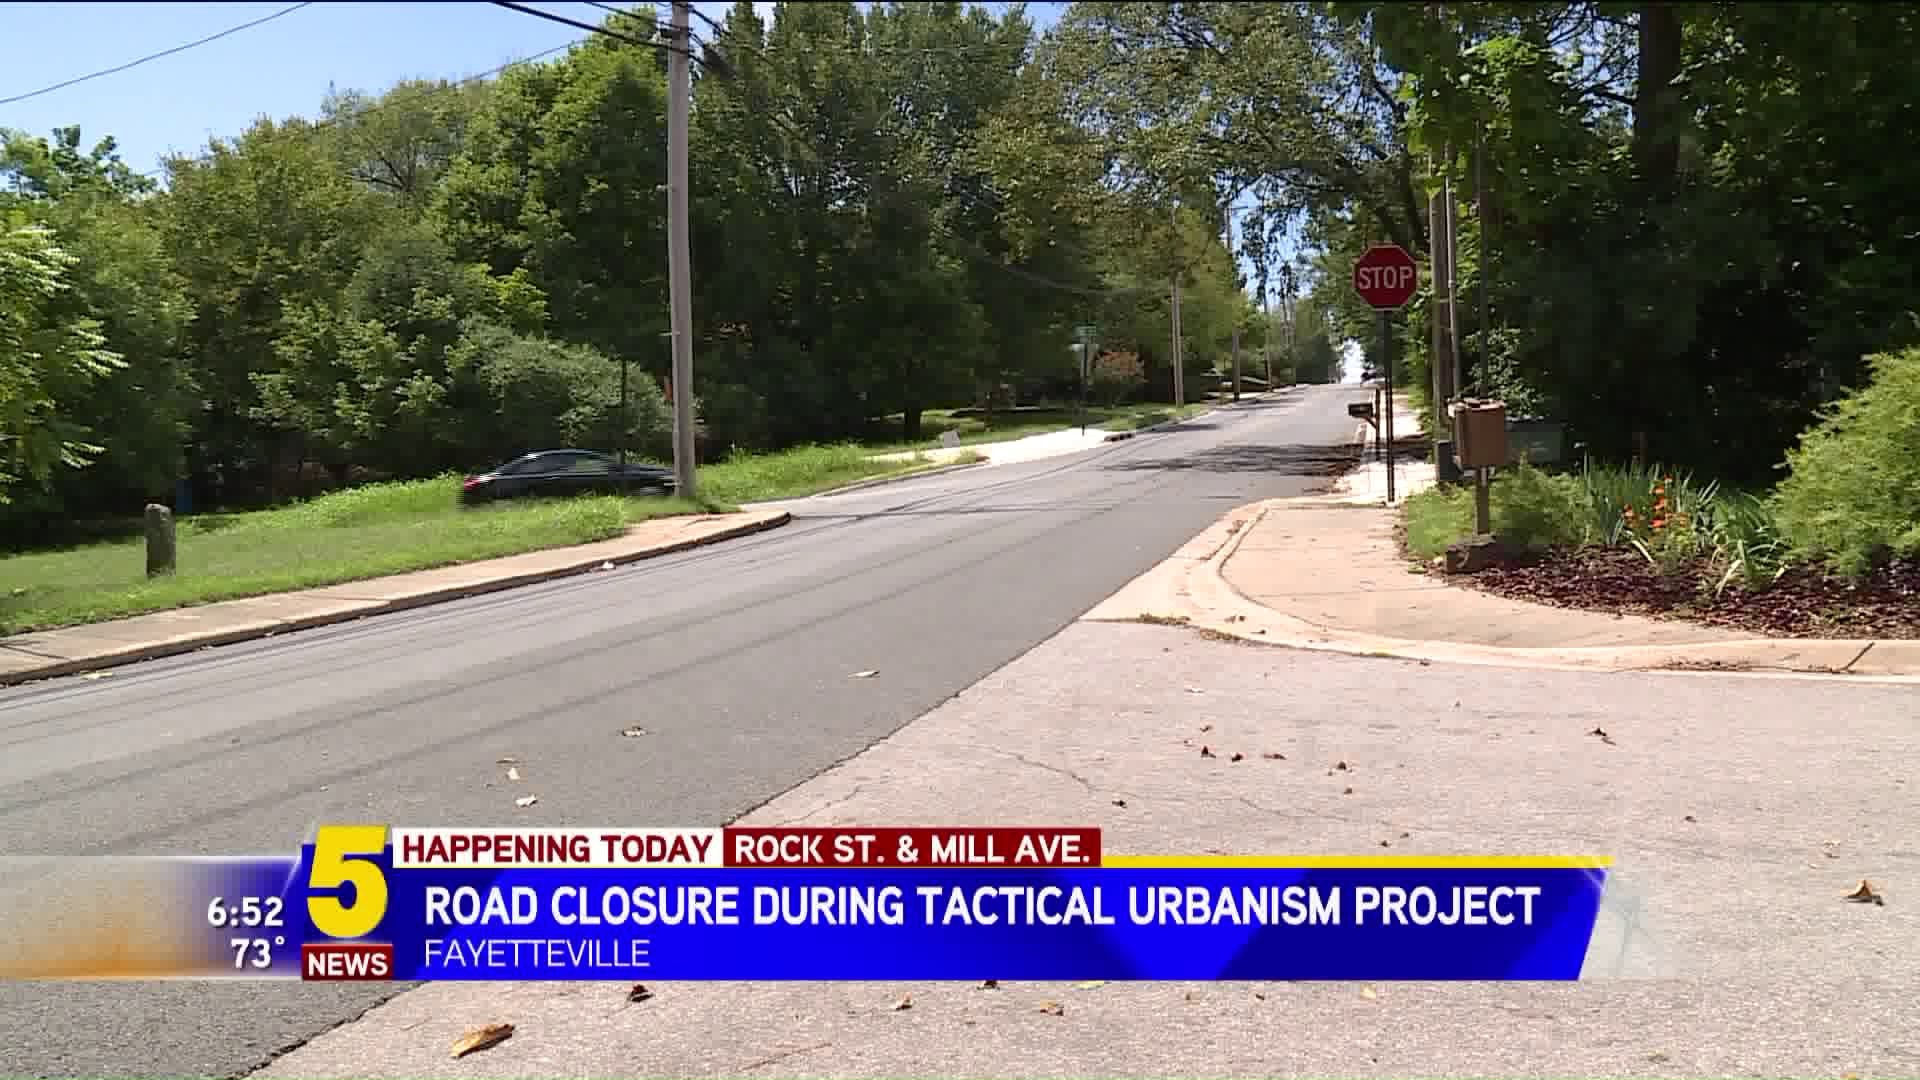 Fayetteville Tactical Urbanism